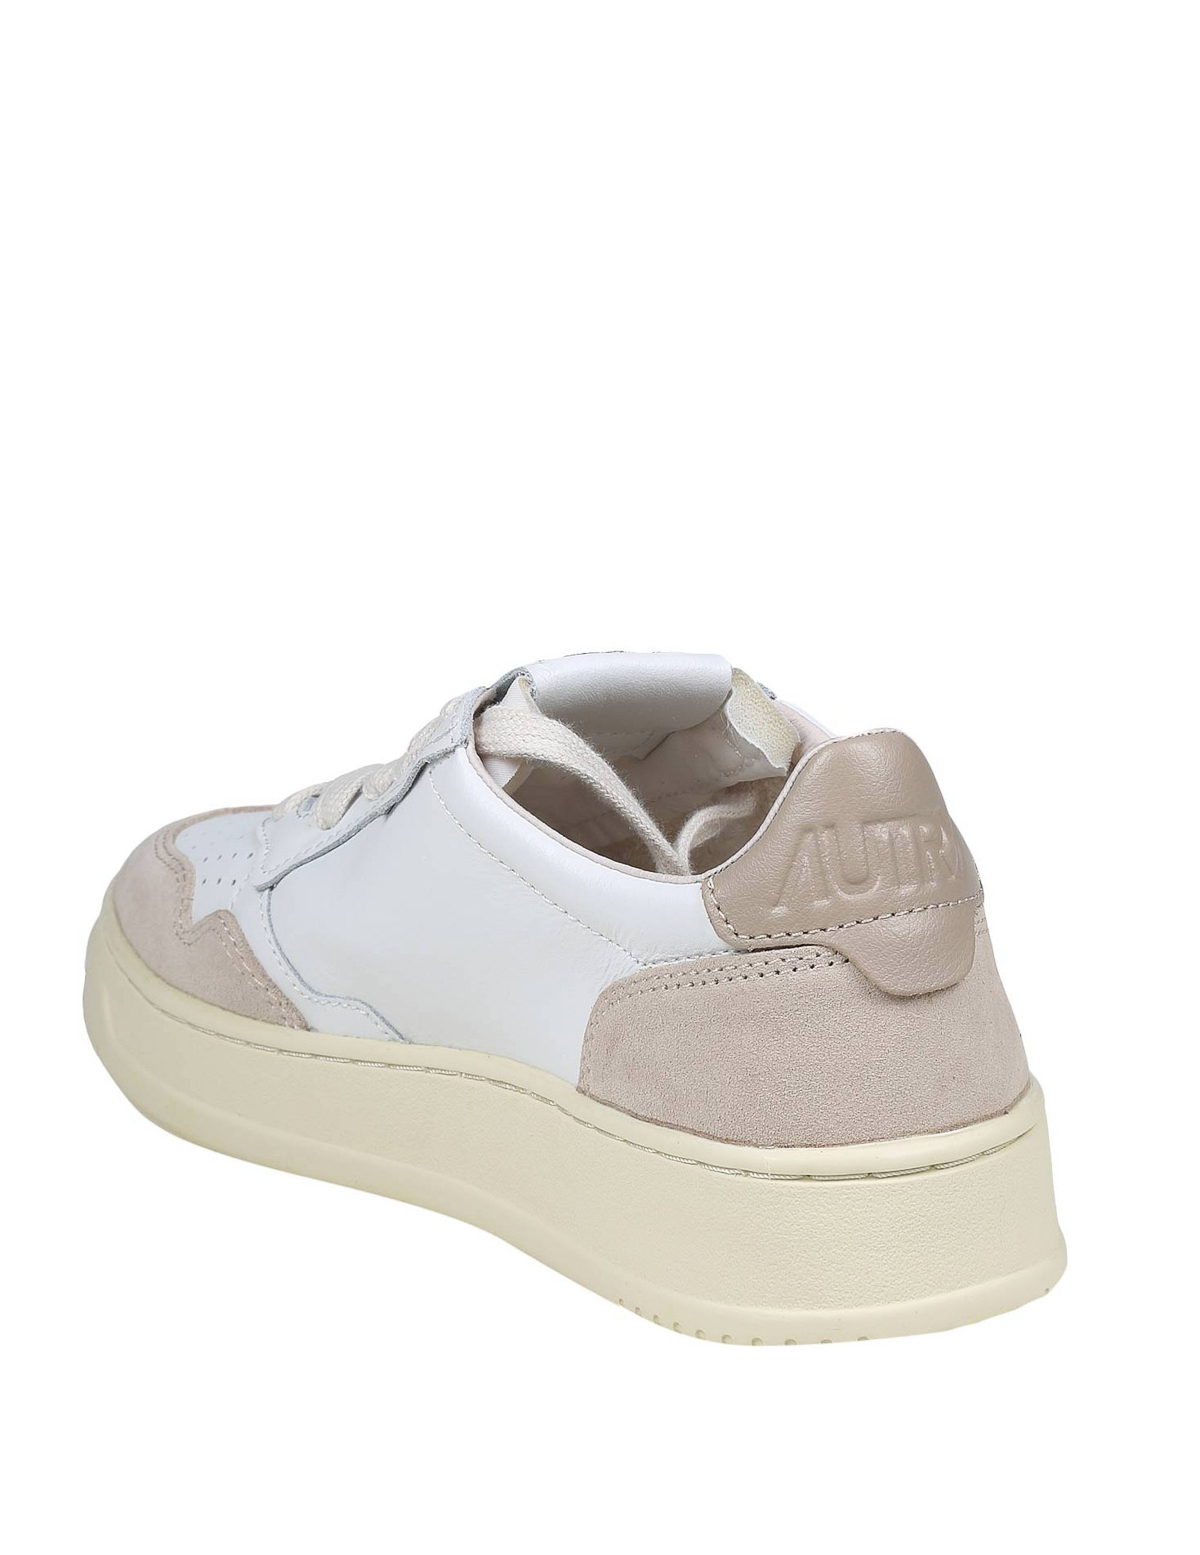 Trainers Autry - Autry sneakers in white leather and suede - AULWLS58